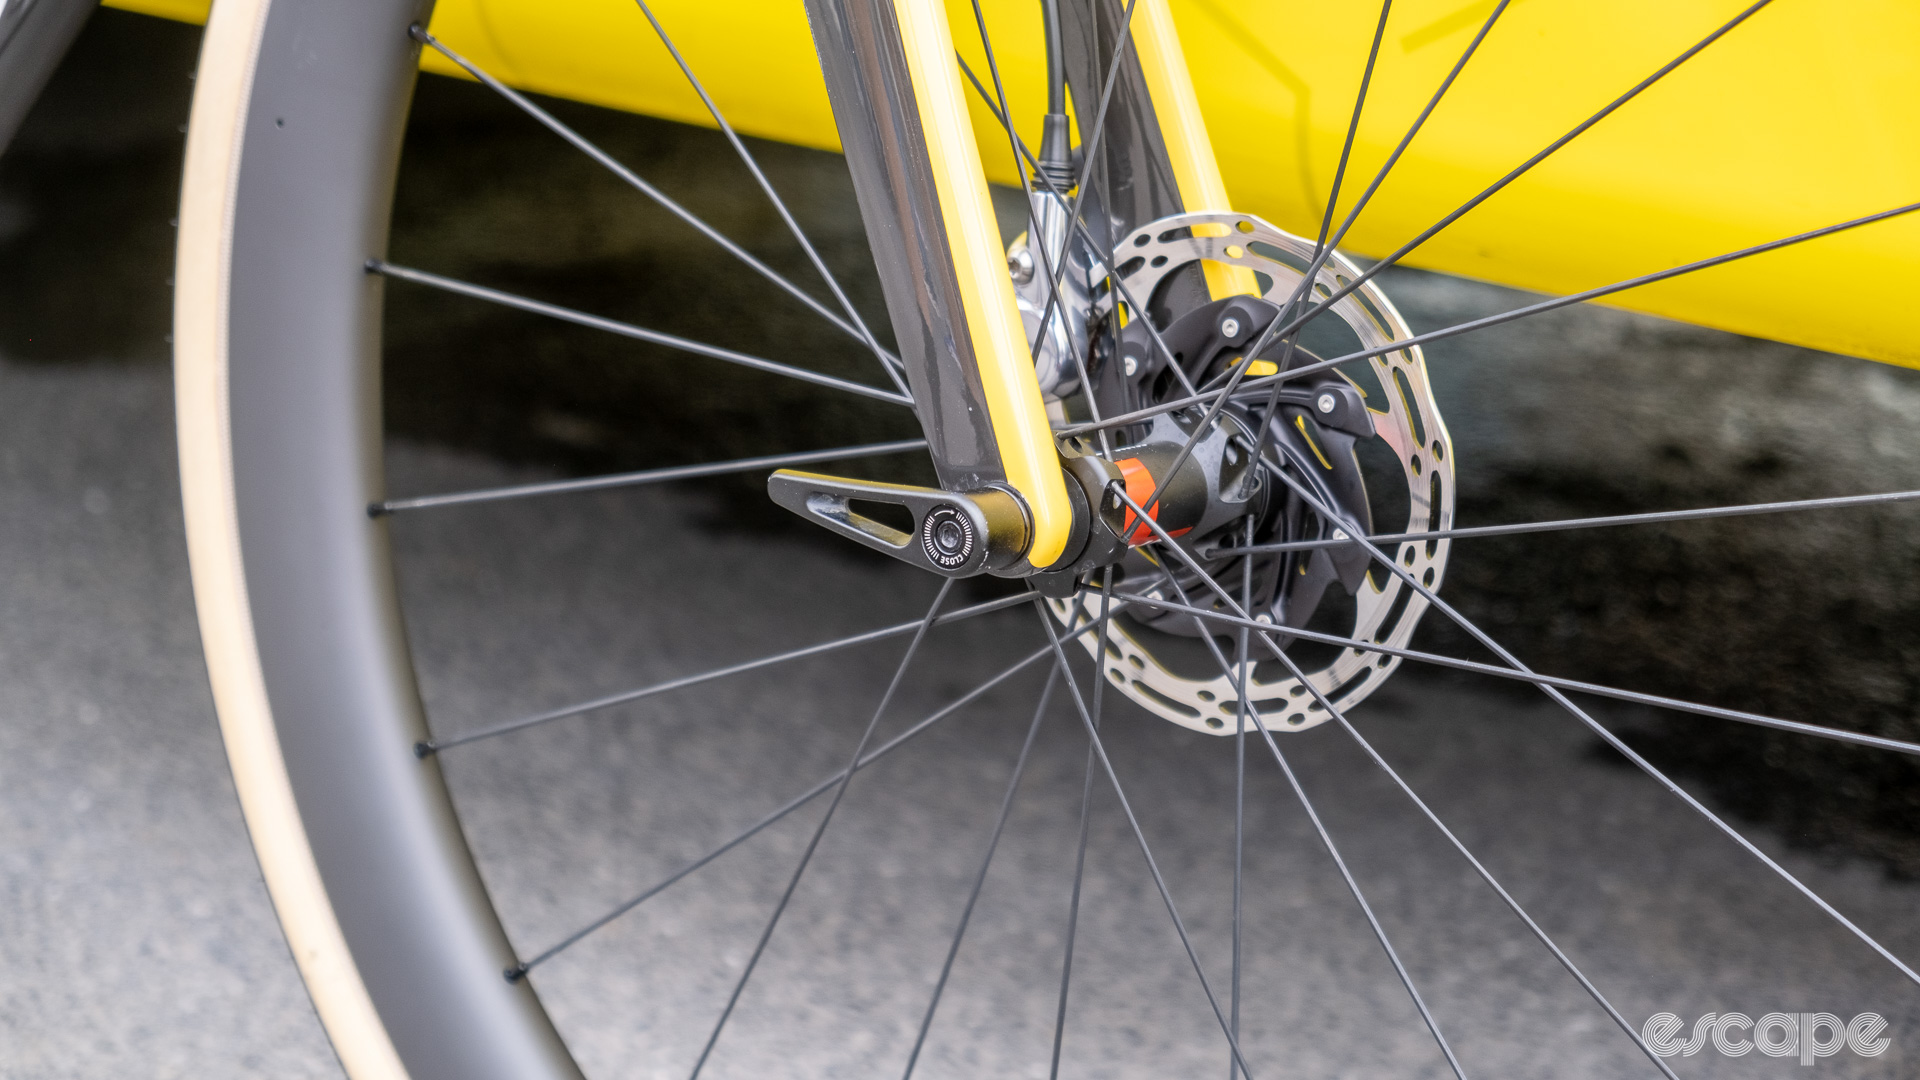 The image shows the front disc brake rotor on Marianne Vos' Cervelo Soloist.